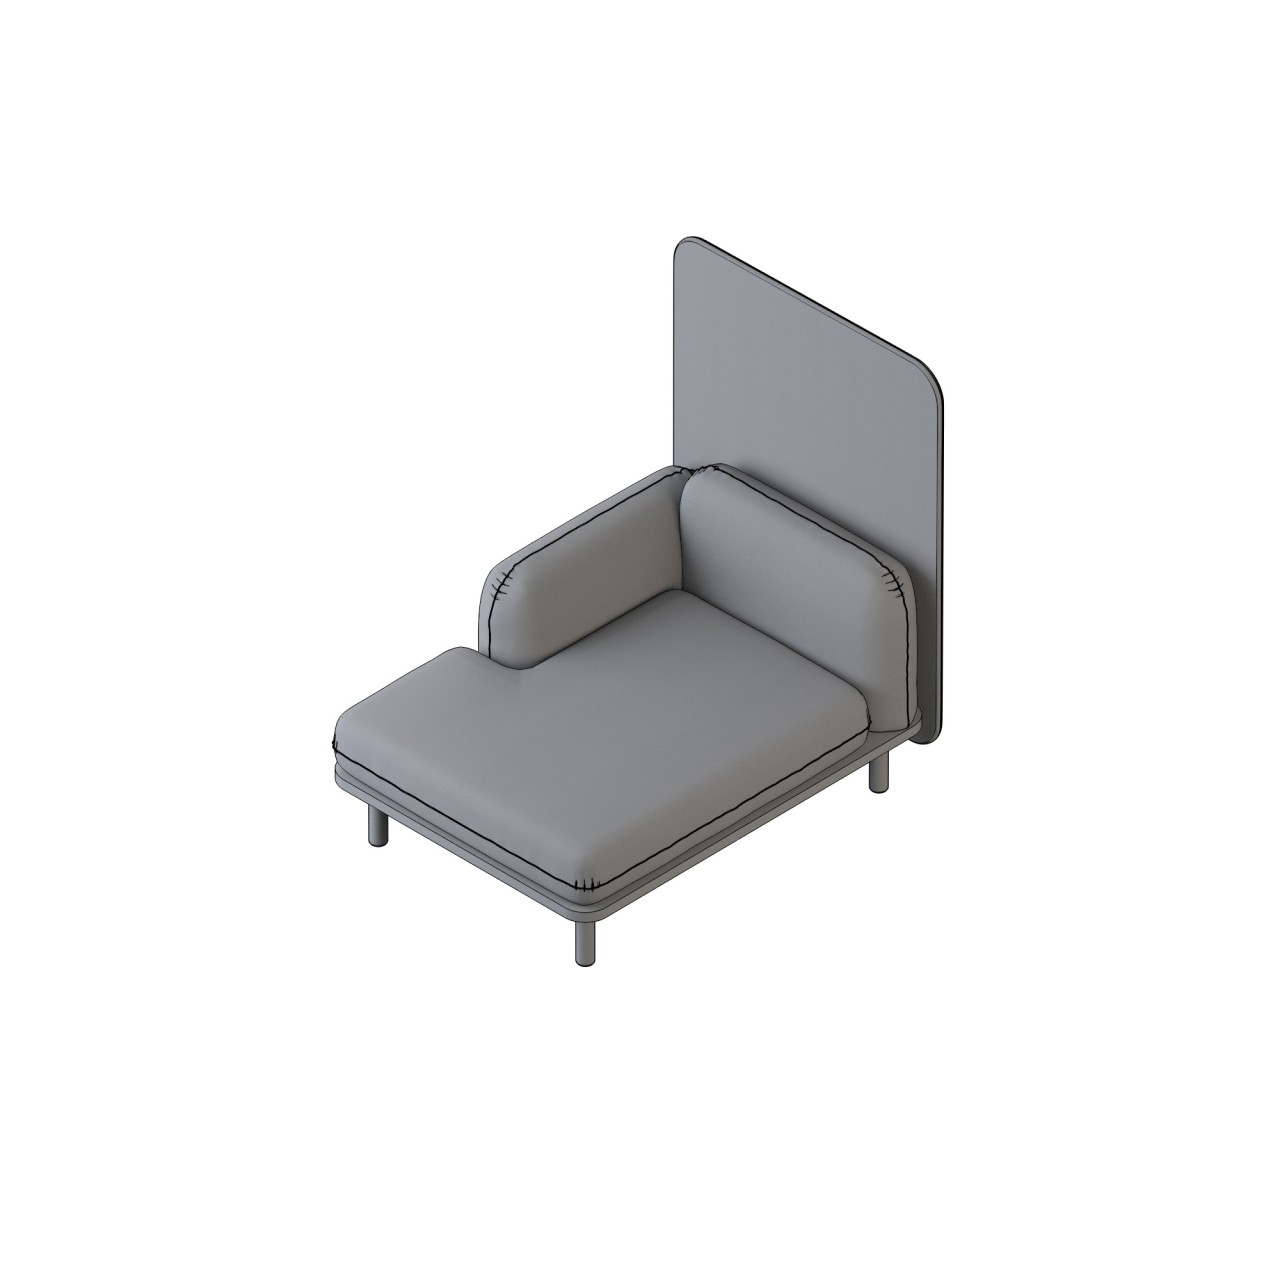 Soft - 24010R-B
right arm chaise
privacy
COM 9.75
arms 1.25,
back 1.5, base 2,
seat 2.75, panel 3